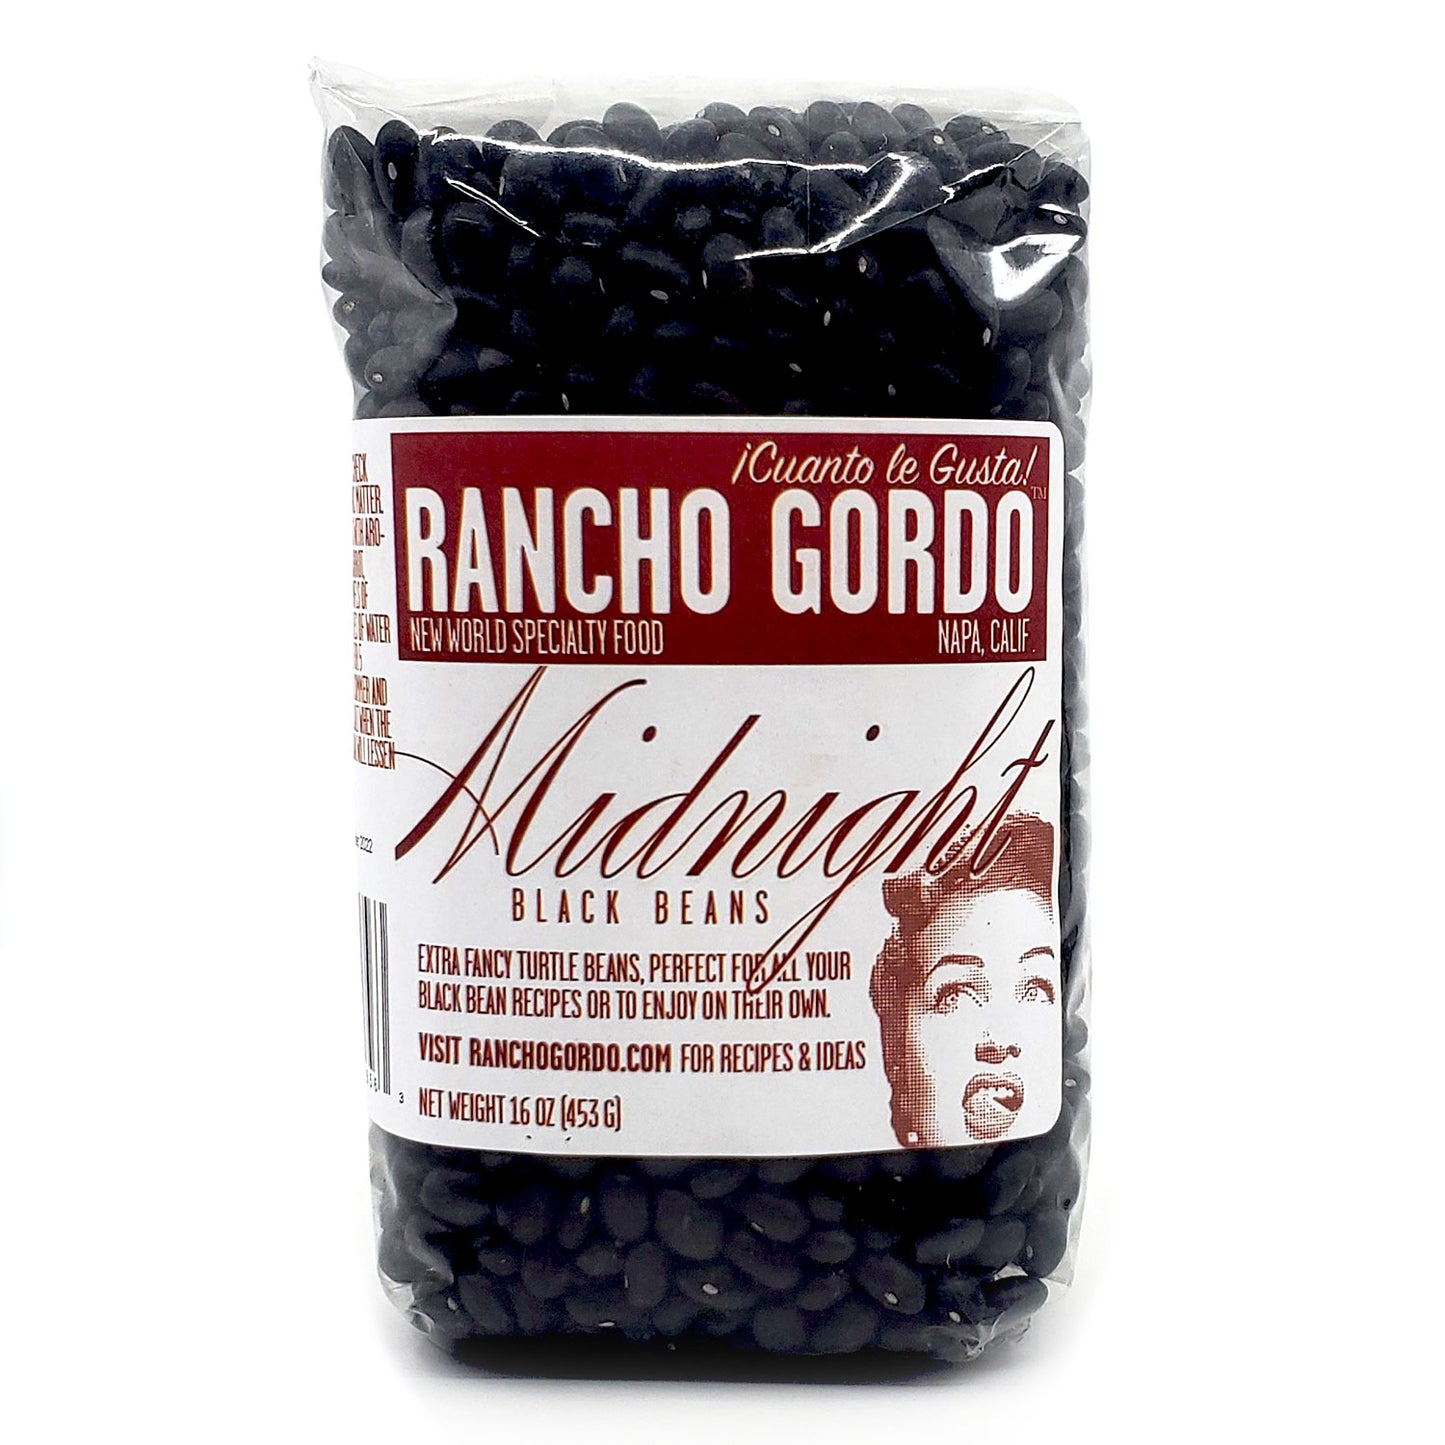 Rancho gordo midnight black beans. Perfect for all bean recipes or to enjoy on their own. heirloom beans.